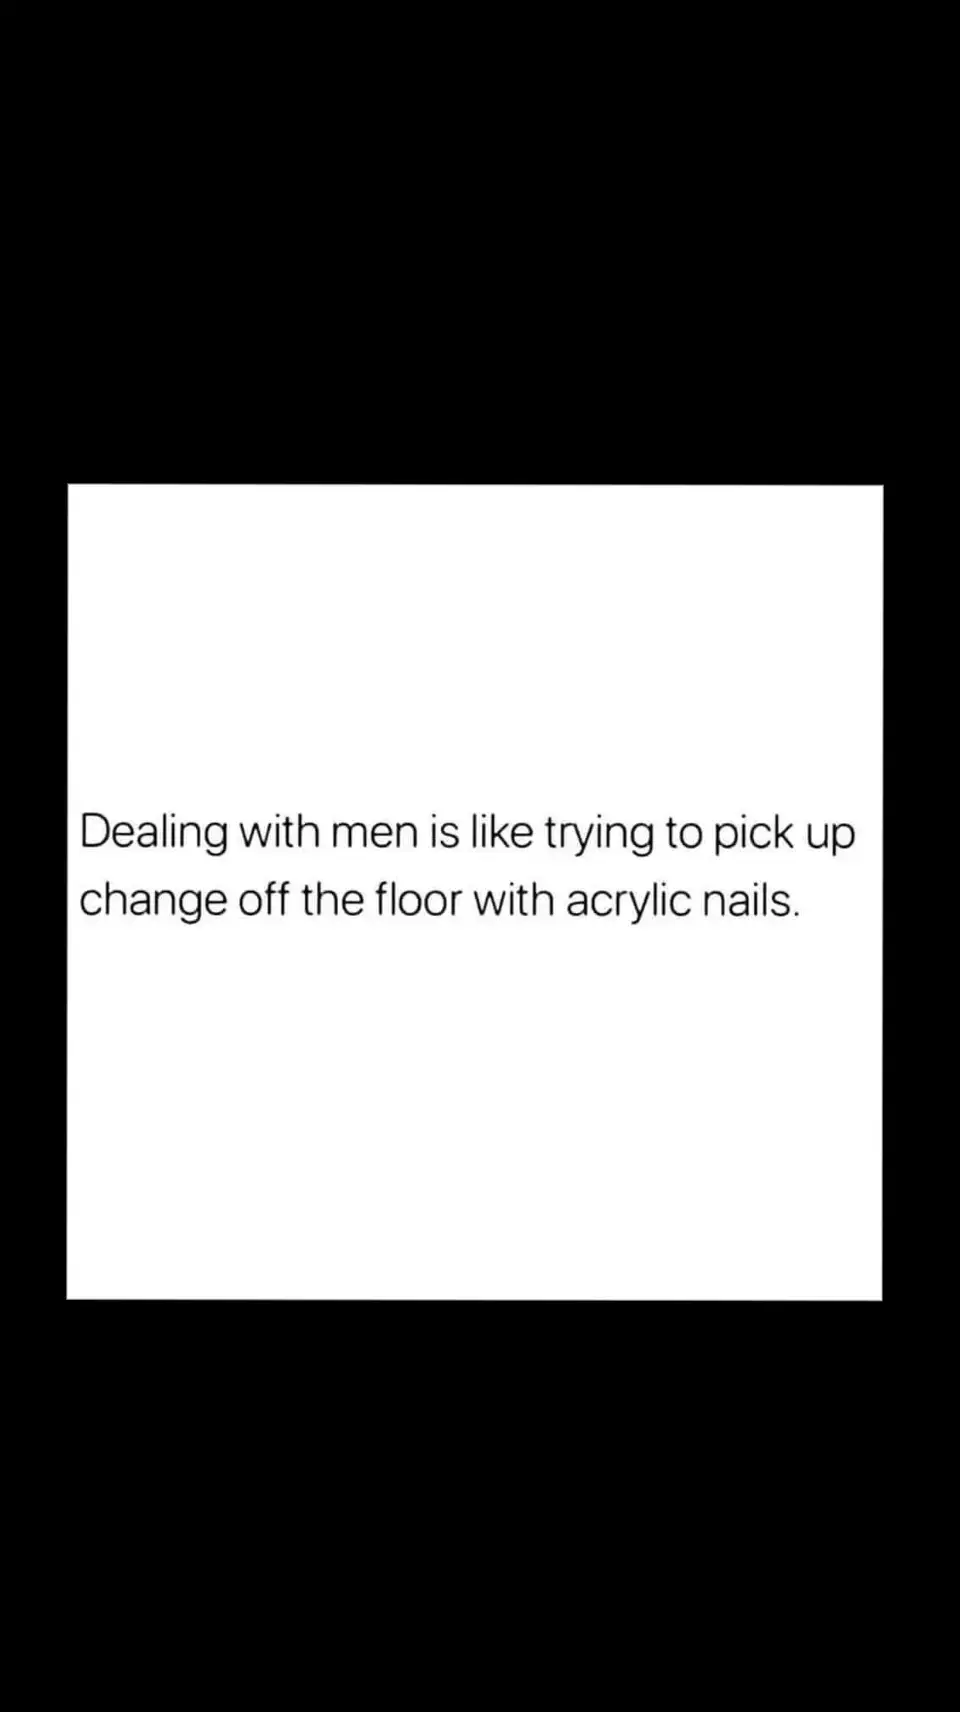 only woman would understand, the struggle 💅🏻🤣🙃 #men #SAMA28 #mindset #selflove #Love #relationships #heartbroken #redflags #narcissist #emotionalabuse #narcissticabuserecovery #healing #HealingJourney #BestVersionOfYou #emotionalintelligence #respect #lifeisajourney #selfworth #selfrespect #happiness #positivity #dailyquotes #affirmations #SelfCare #selflove #motivationalquote #inspirationa #purpose #authenticity #personaldevelopment #personalgrowth #mindset